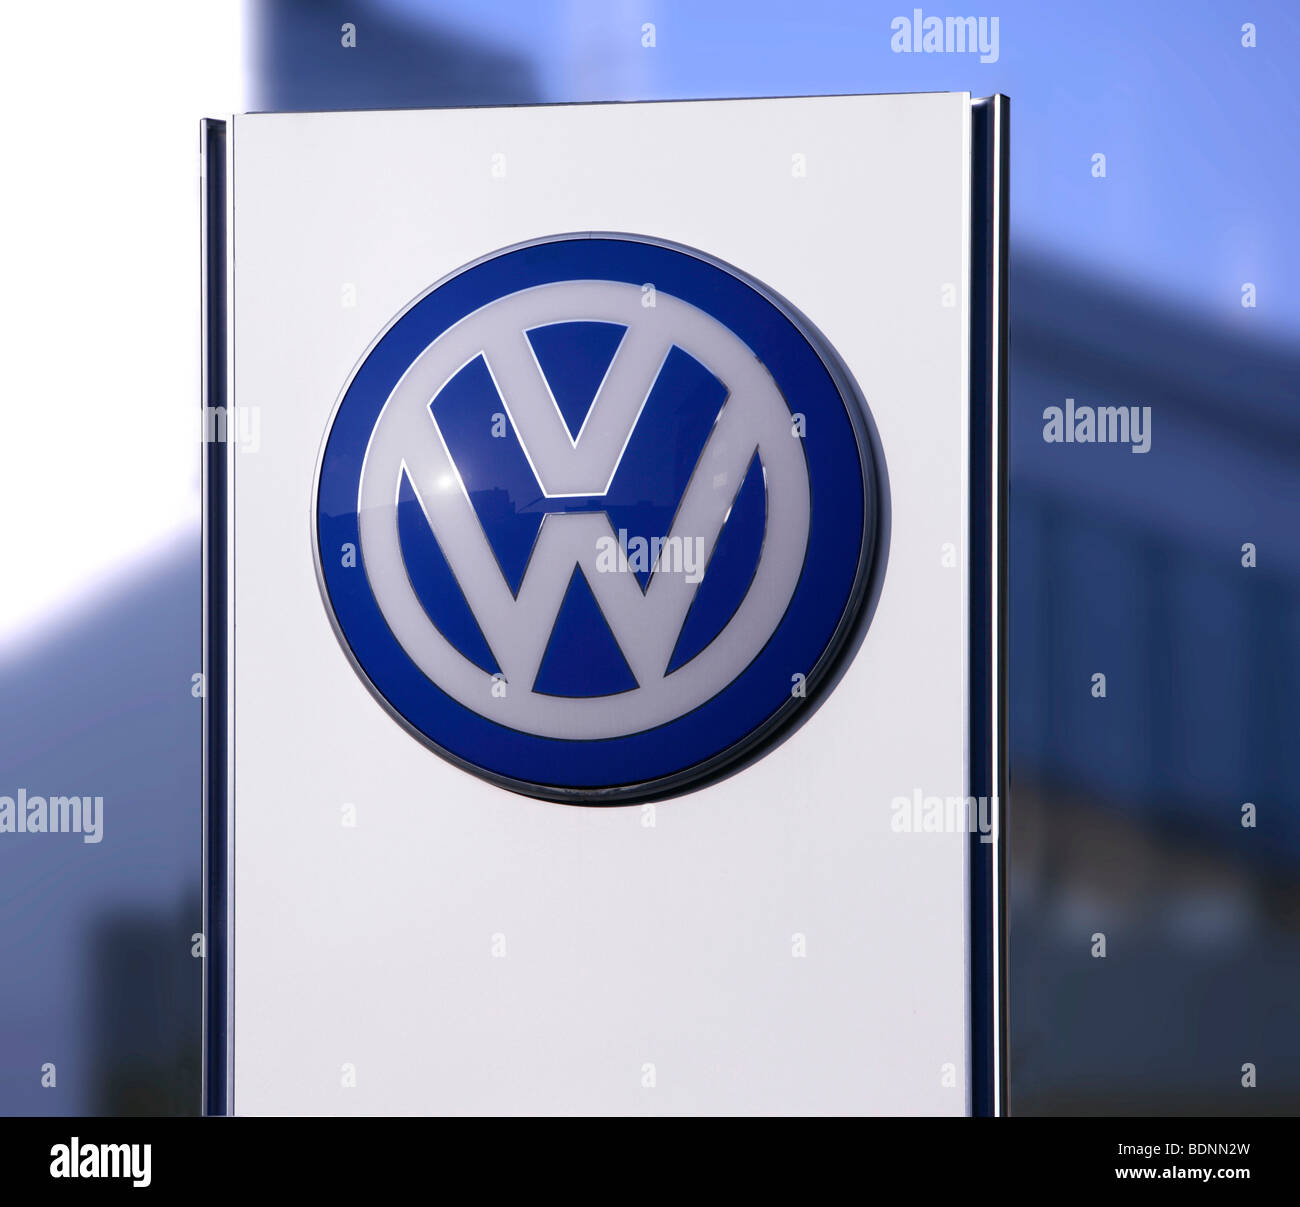 How the VW logo changed from 1937 to 2019